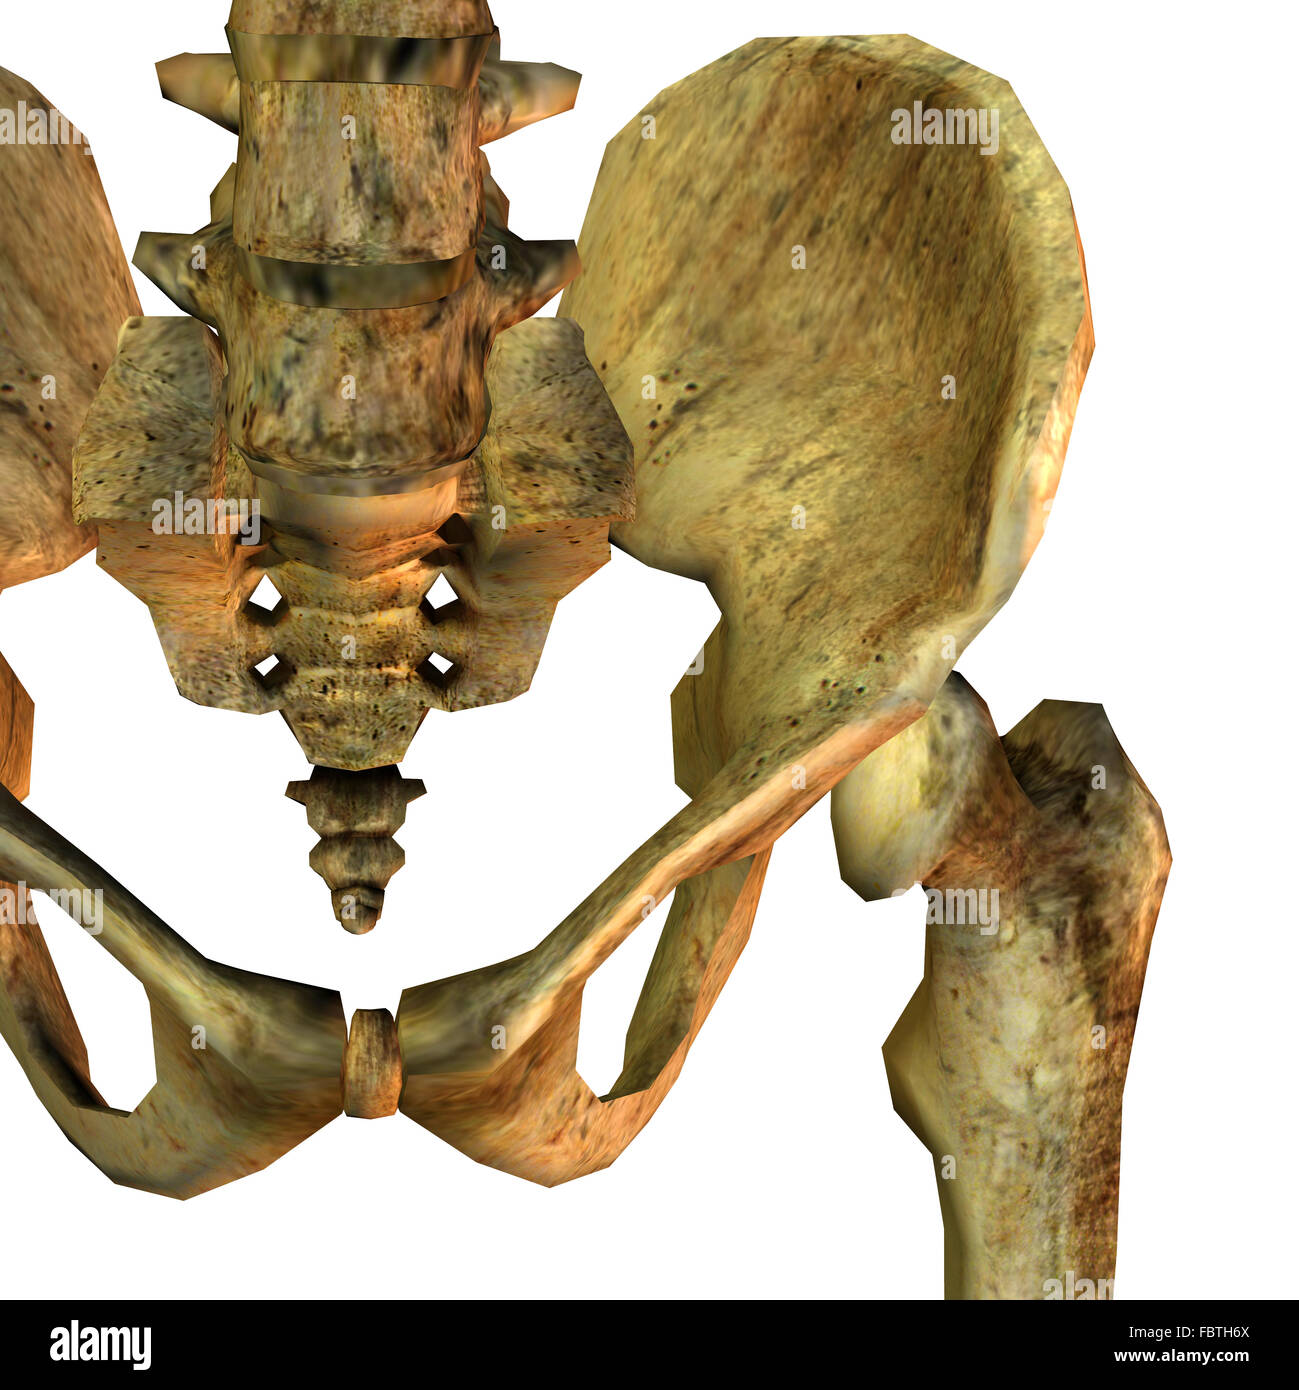 Pelvic Bones High Resolution Stock Photography and Images - Alamy